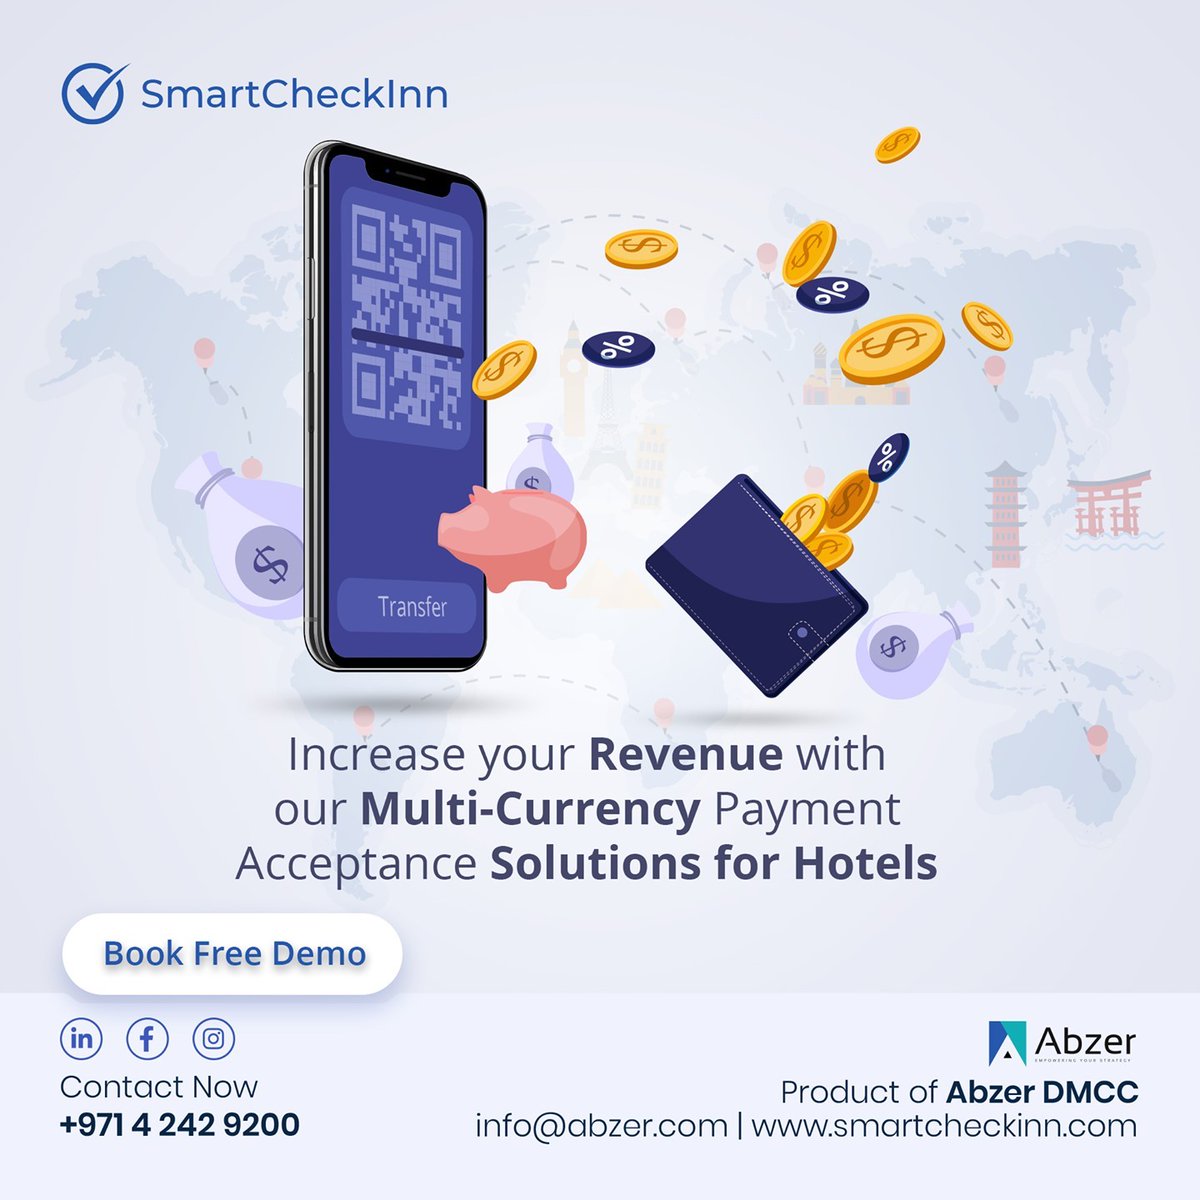 Increase your revenue with our Multi currency payment acceptance solutions for hotels!
.
.
Visit for More Info: smartcheckinn.com
.
.
WhatsApp : 0508185200
Call Now : +971 4 242 9200
.
.
#smartcheckinn #hotelpayments#paymentsolutions #abzerdmcc #abzer #onlinepaymentsolution